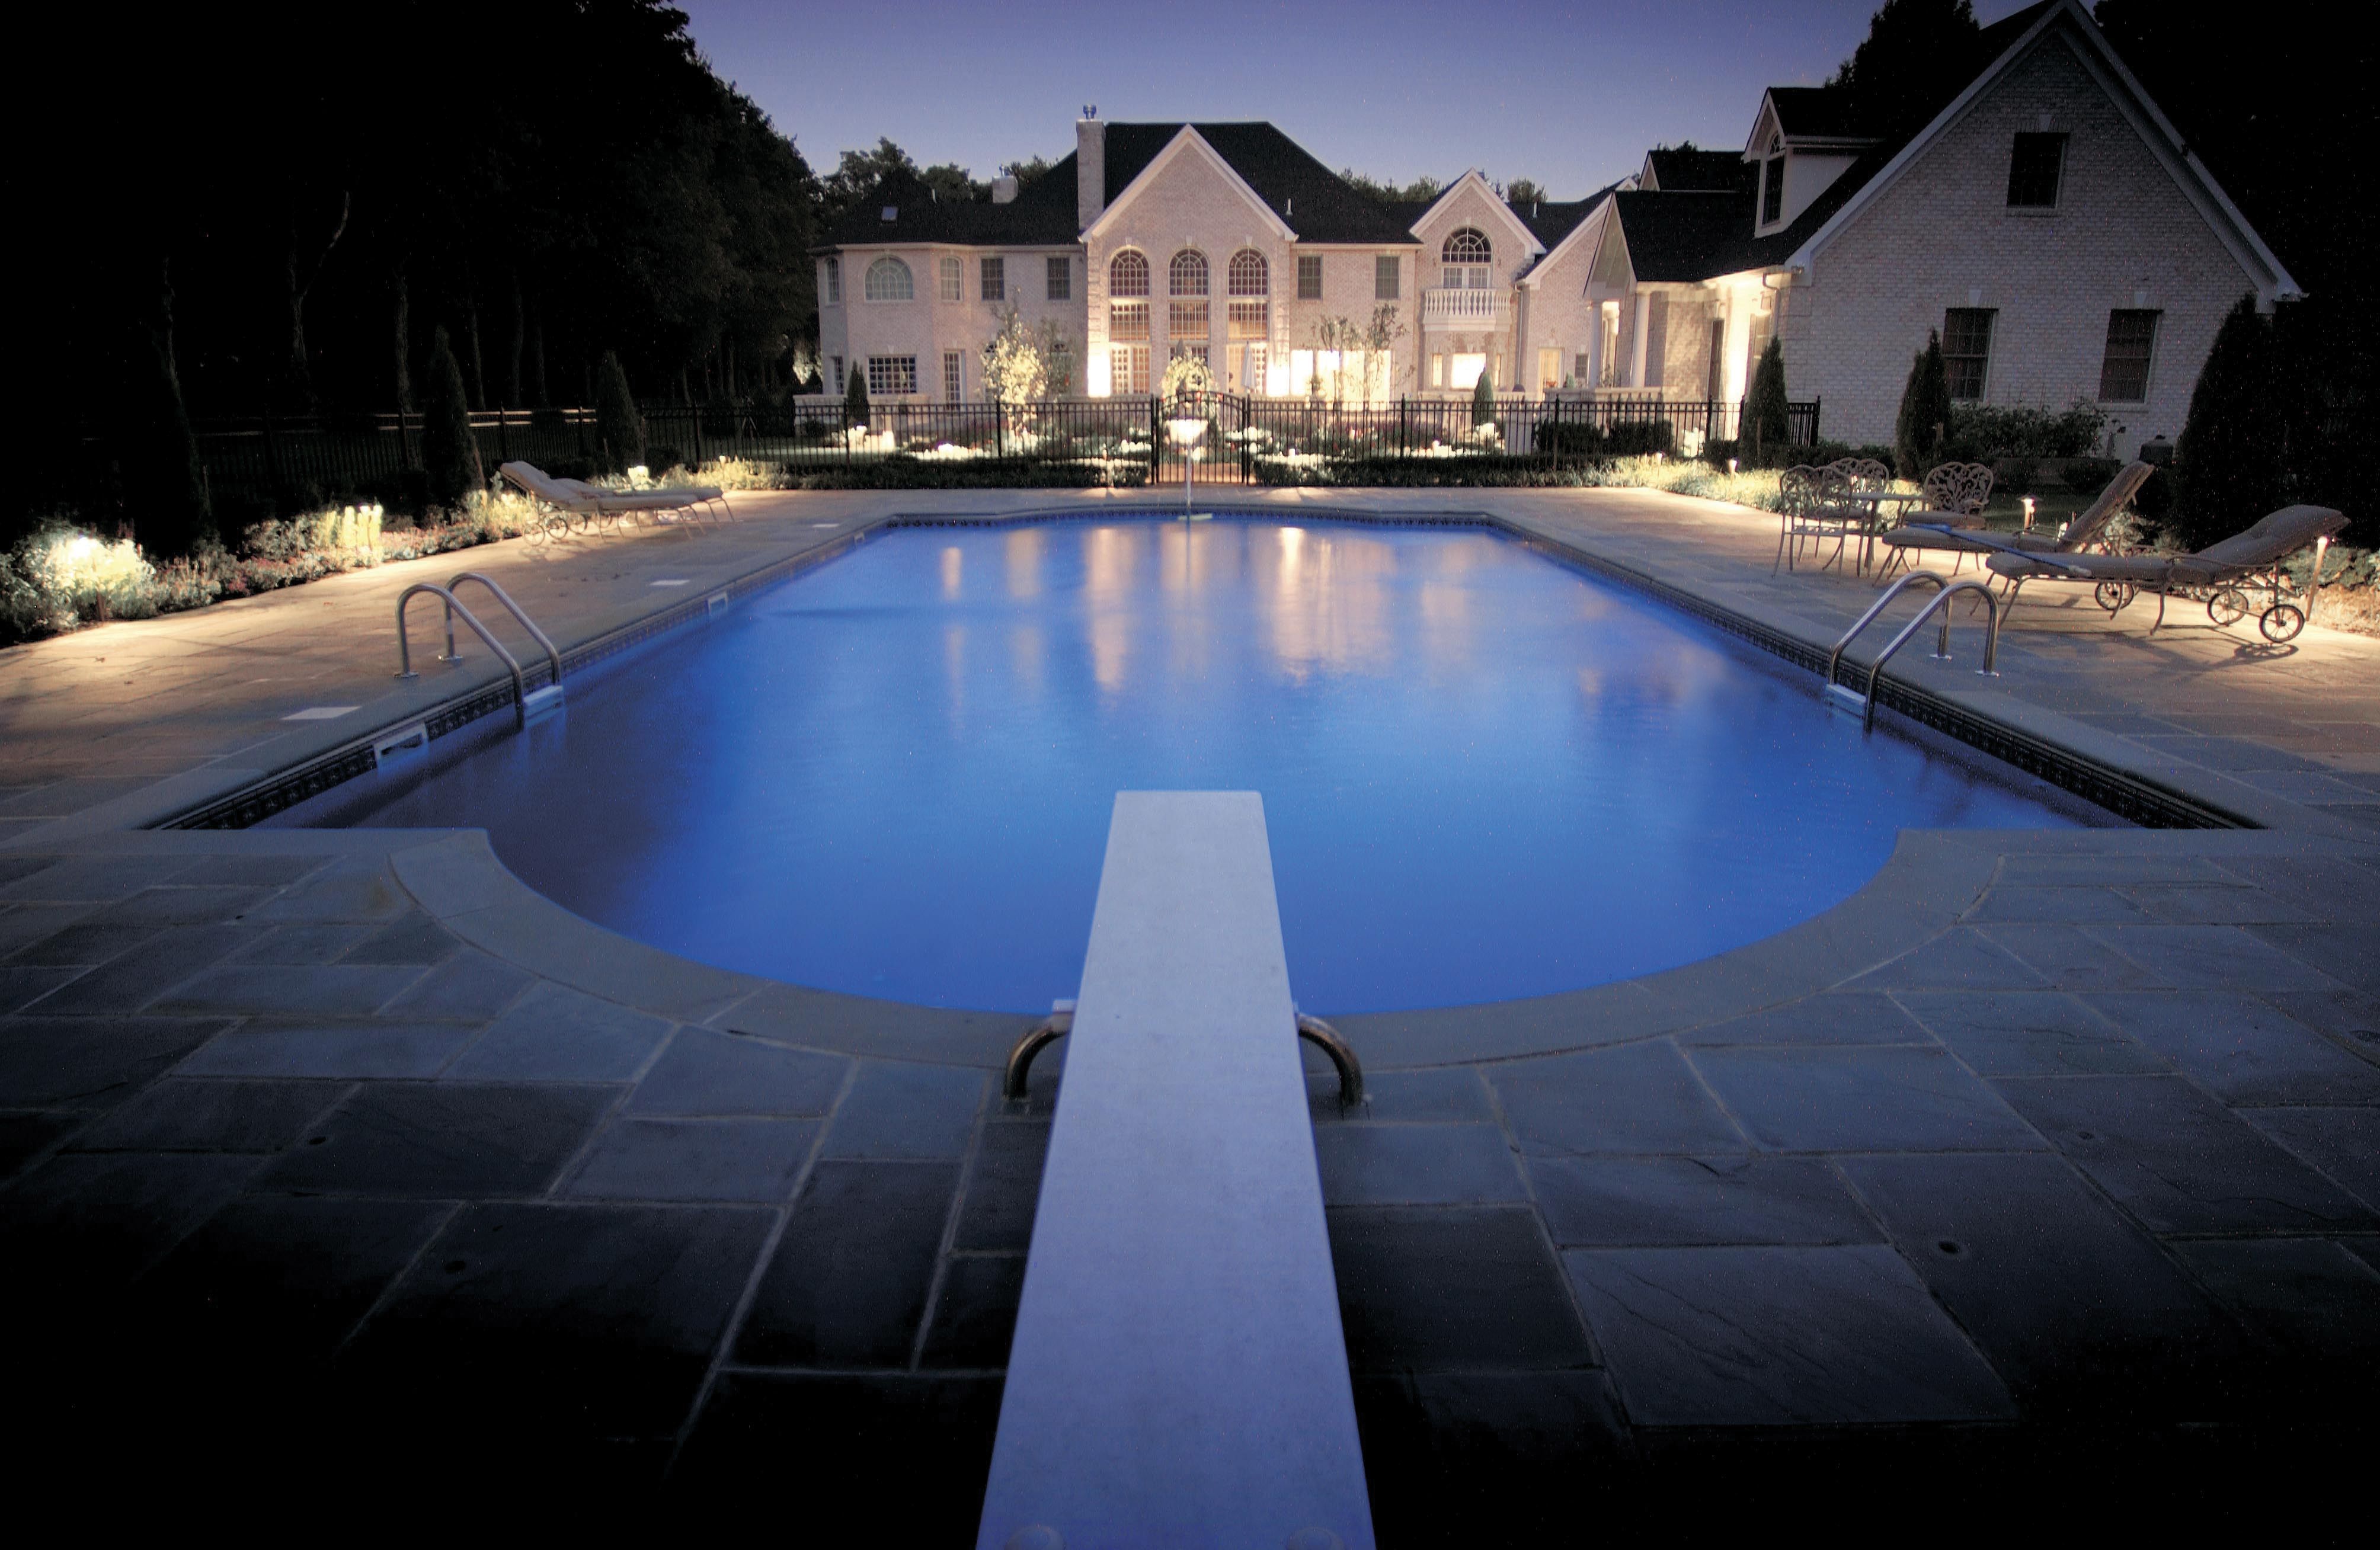 Most Current Outdoor Lighting For Your Poo Within Outdoor Lanterns For Poolside (View 10 of 20)